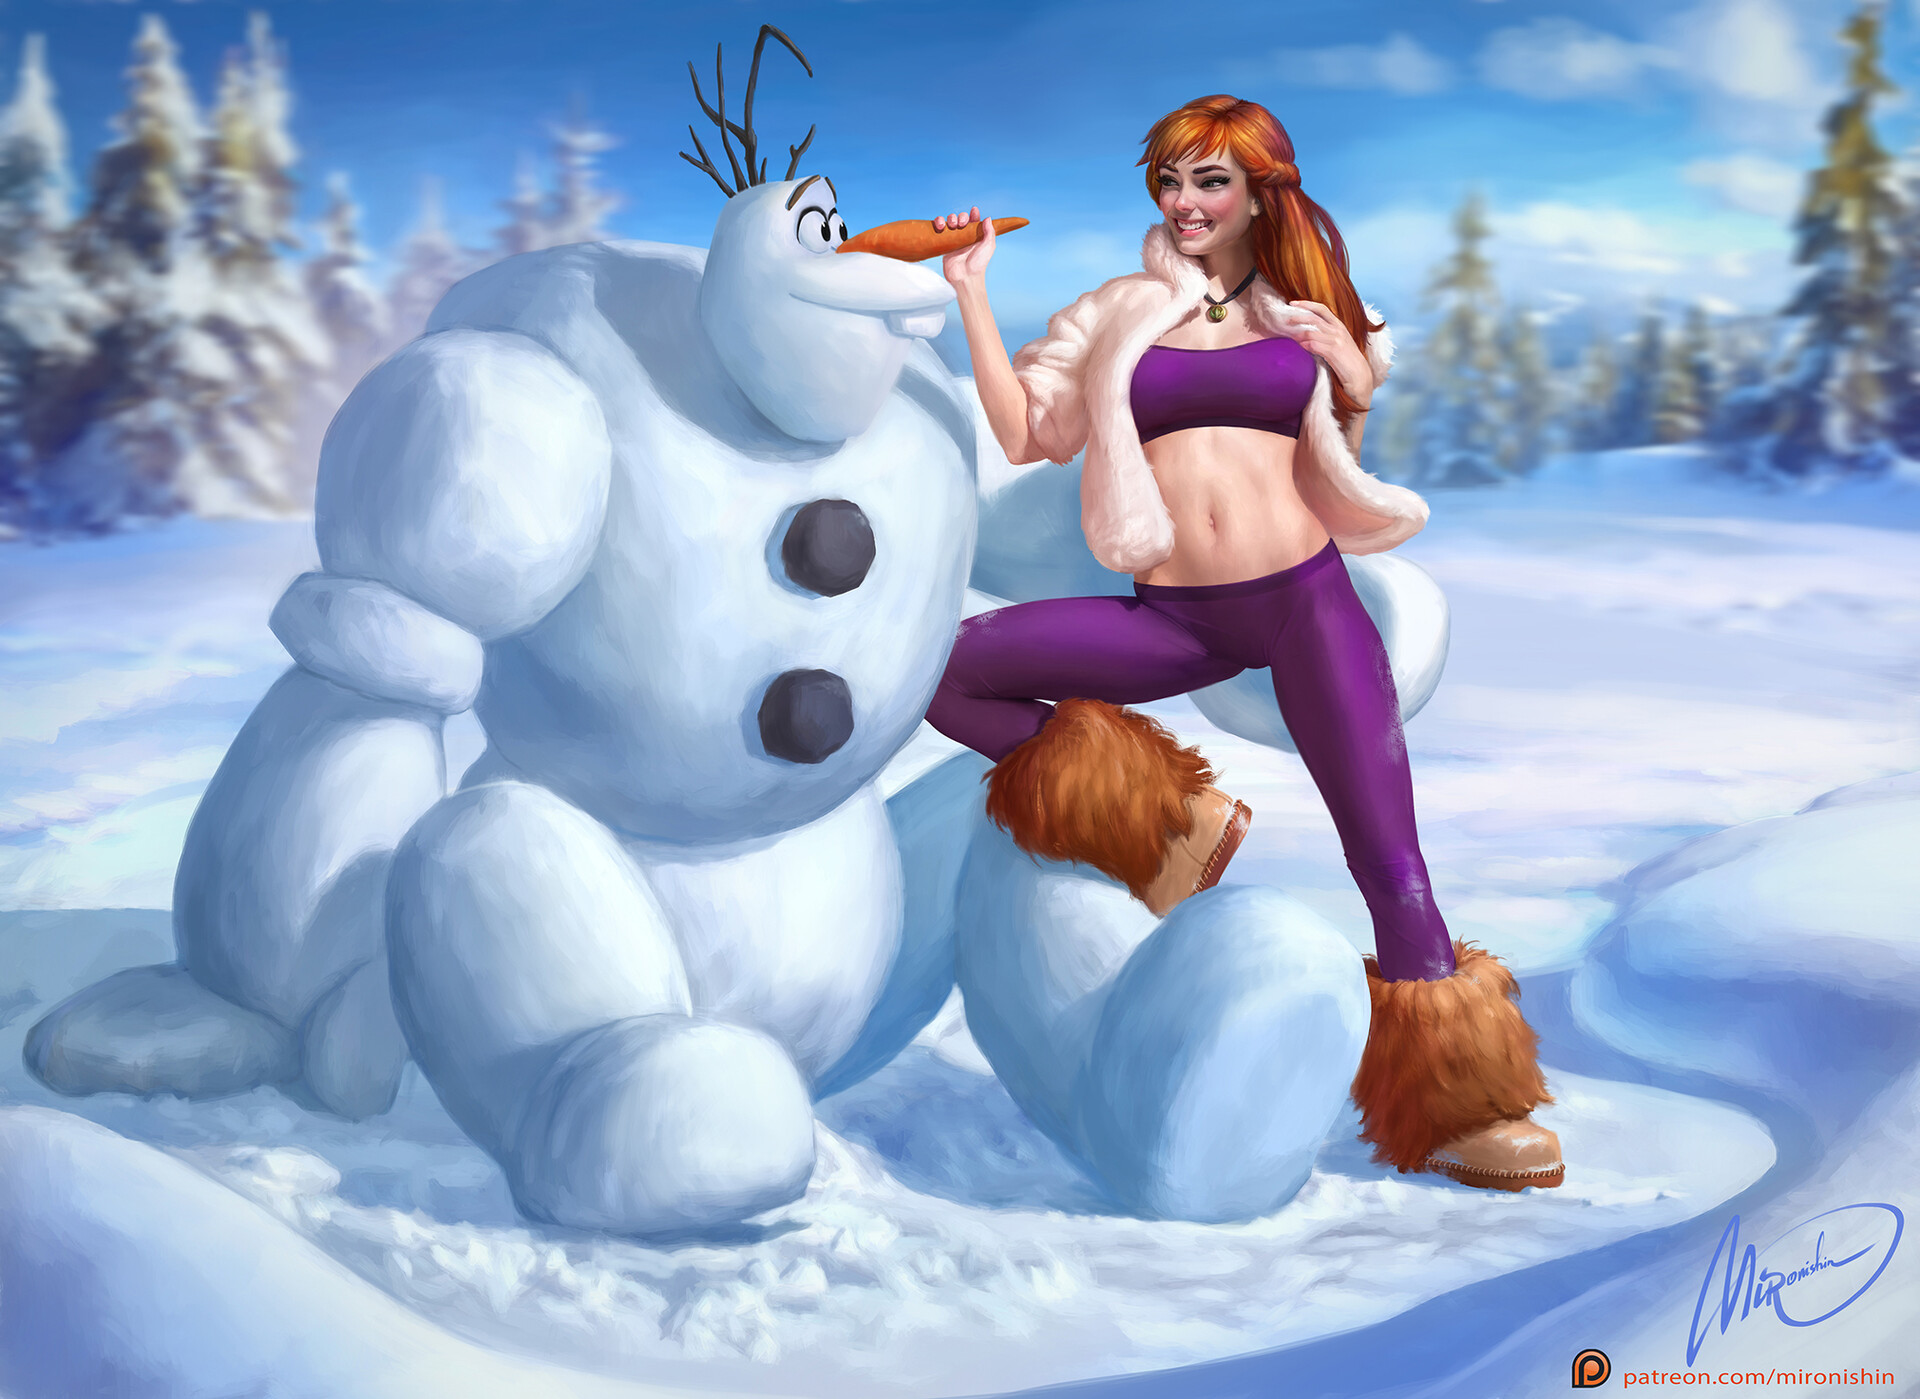 The new big Olaf attracts Anna more than the old one. 